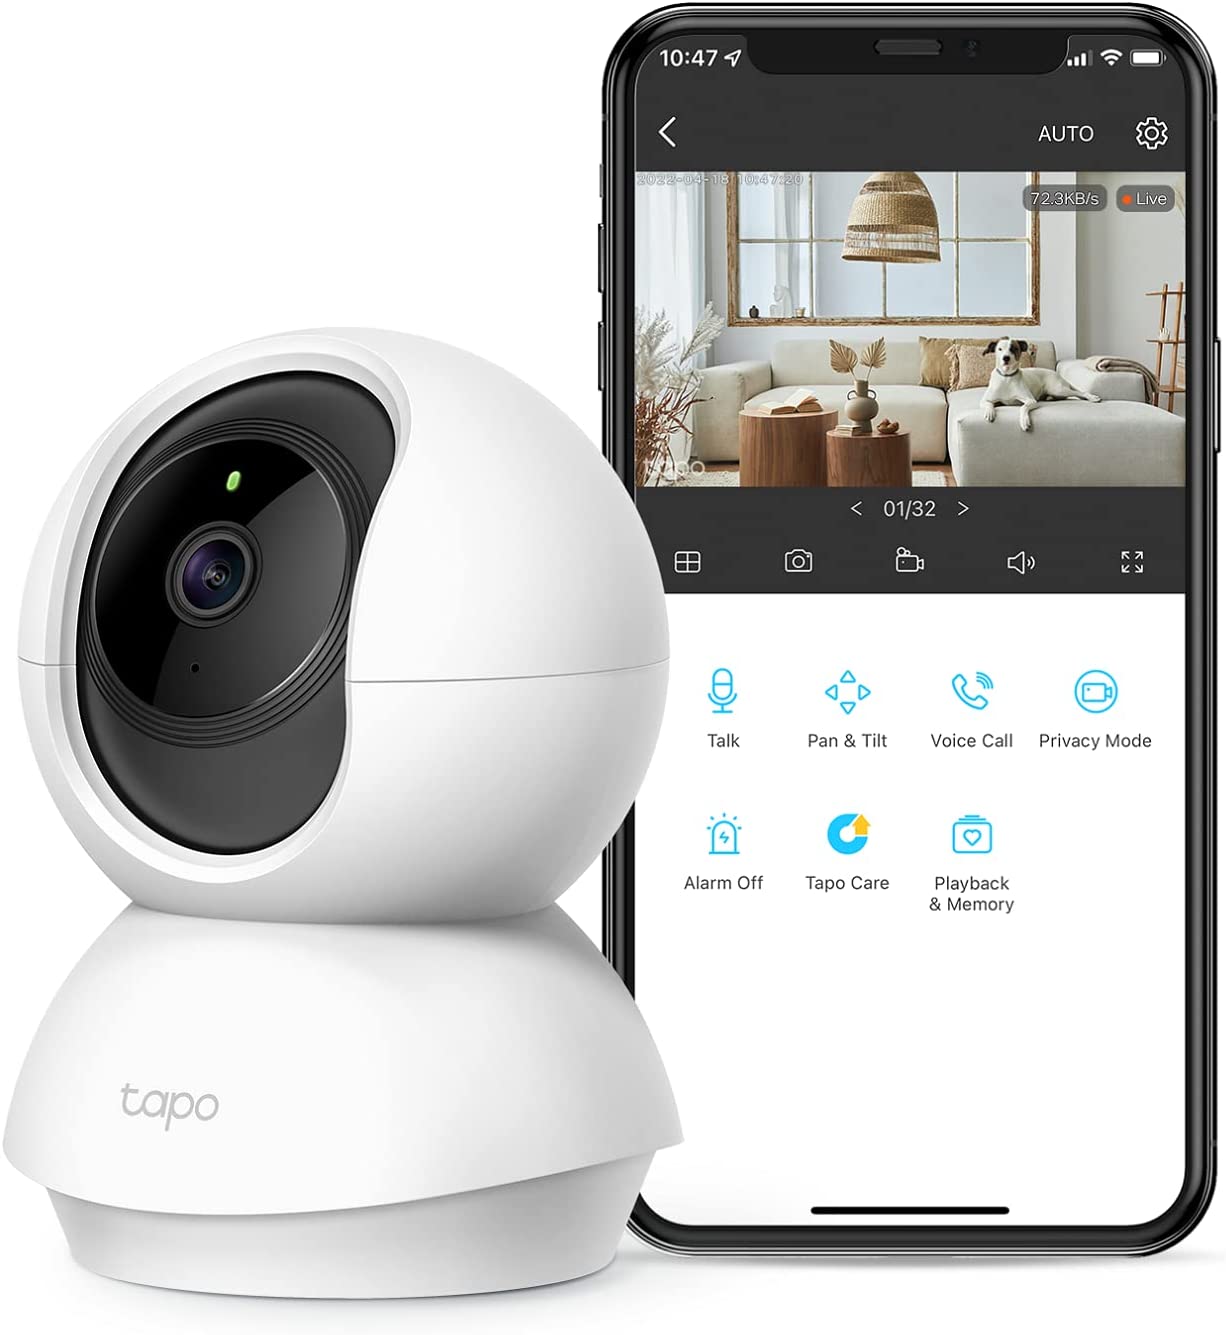 TP-Link Tapo 2K Pan Tilt Security Camera for Baby Monitor, Dog Camera w/ Motion Detection, 2-Way Audio Siren, Night Vision, Cloud &SD Card Storage (Up to 256 GB), Works with Alexa & Google Home (C210) (Refurbished)